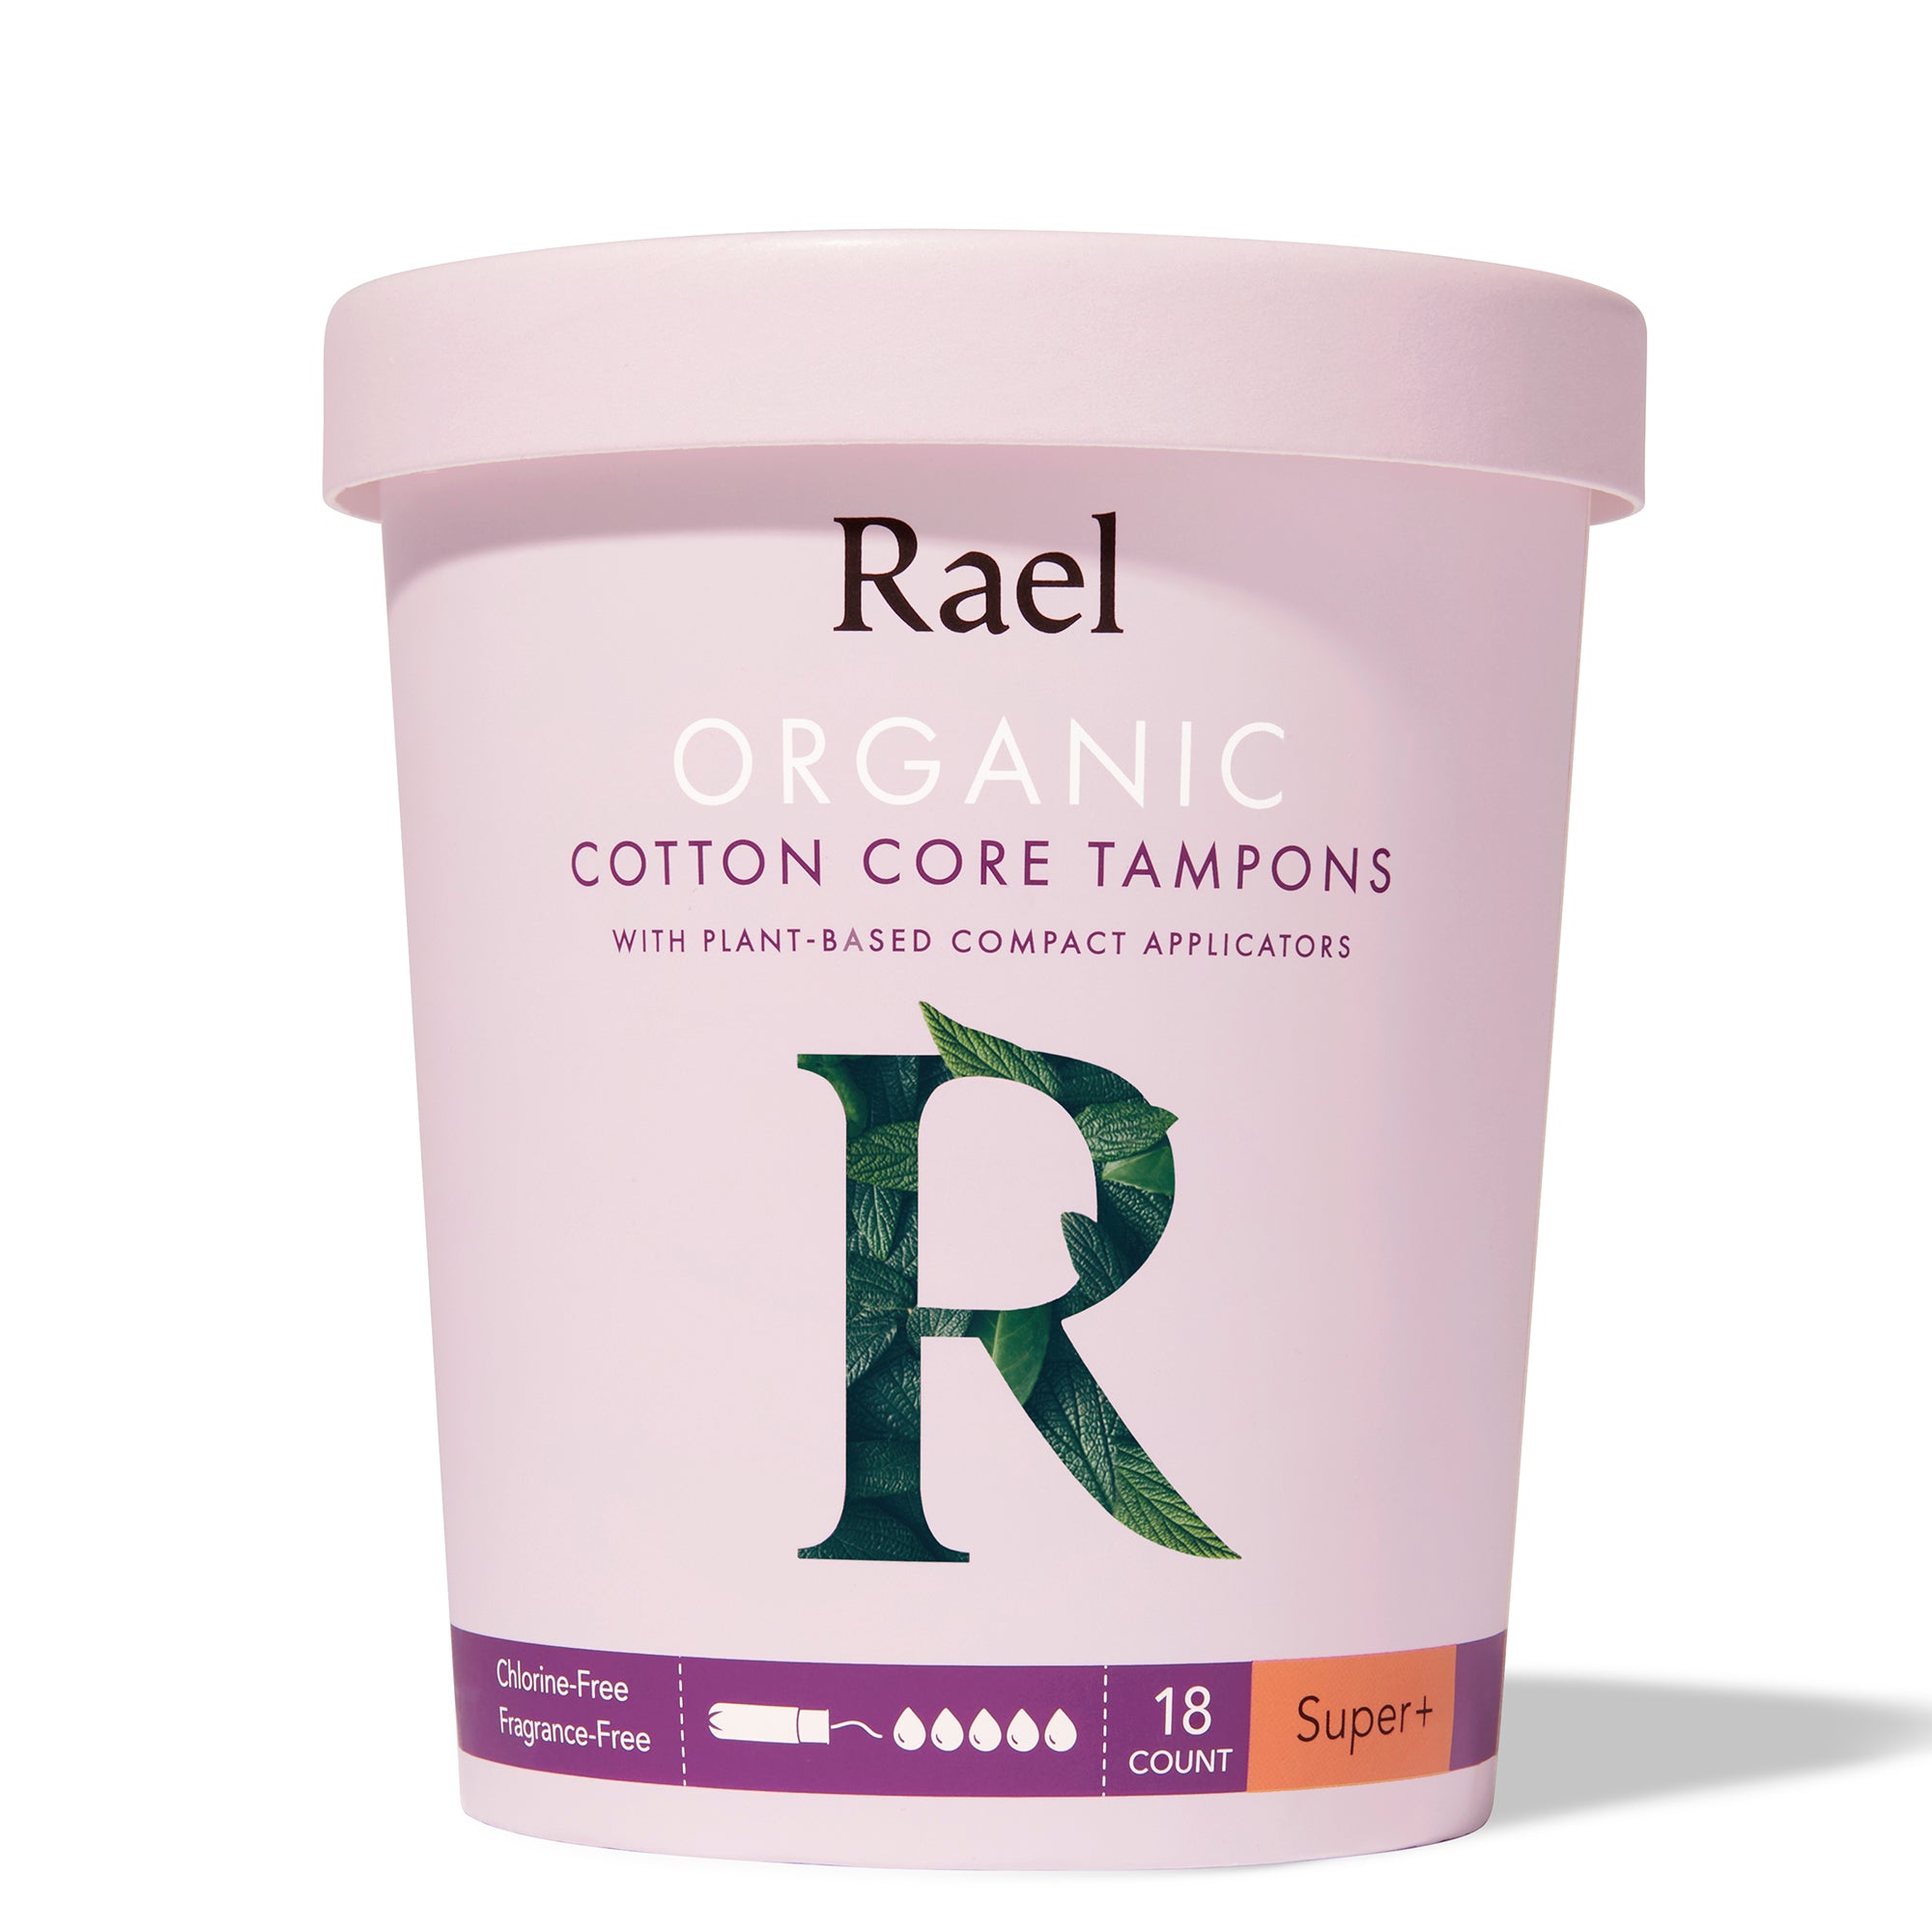 Mother Nature's Best Market Rael Organic Cotton Core Tampons with Plant Based Compact Applicators, Super Plus Cruelty-Free, Vegan